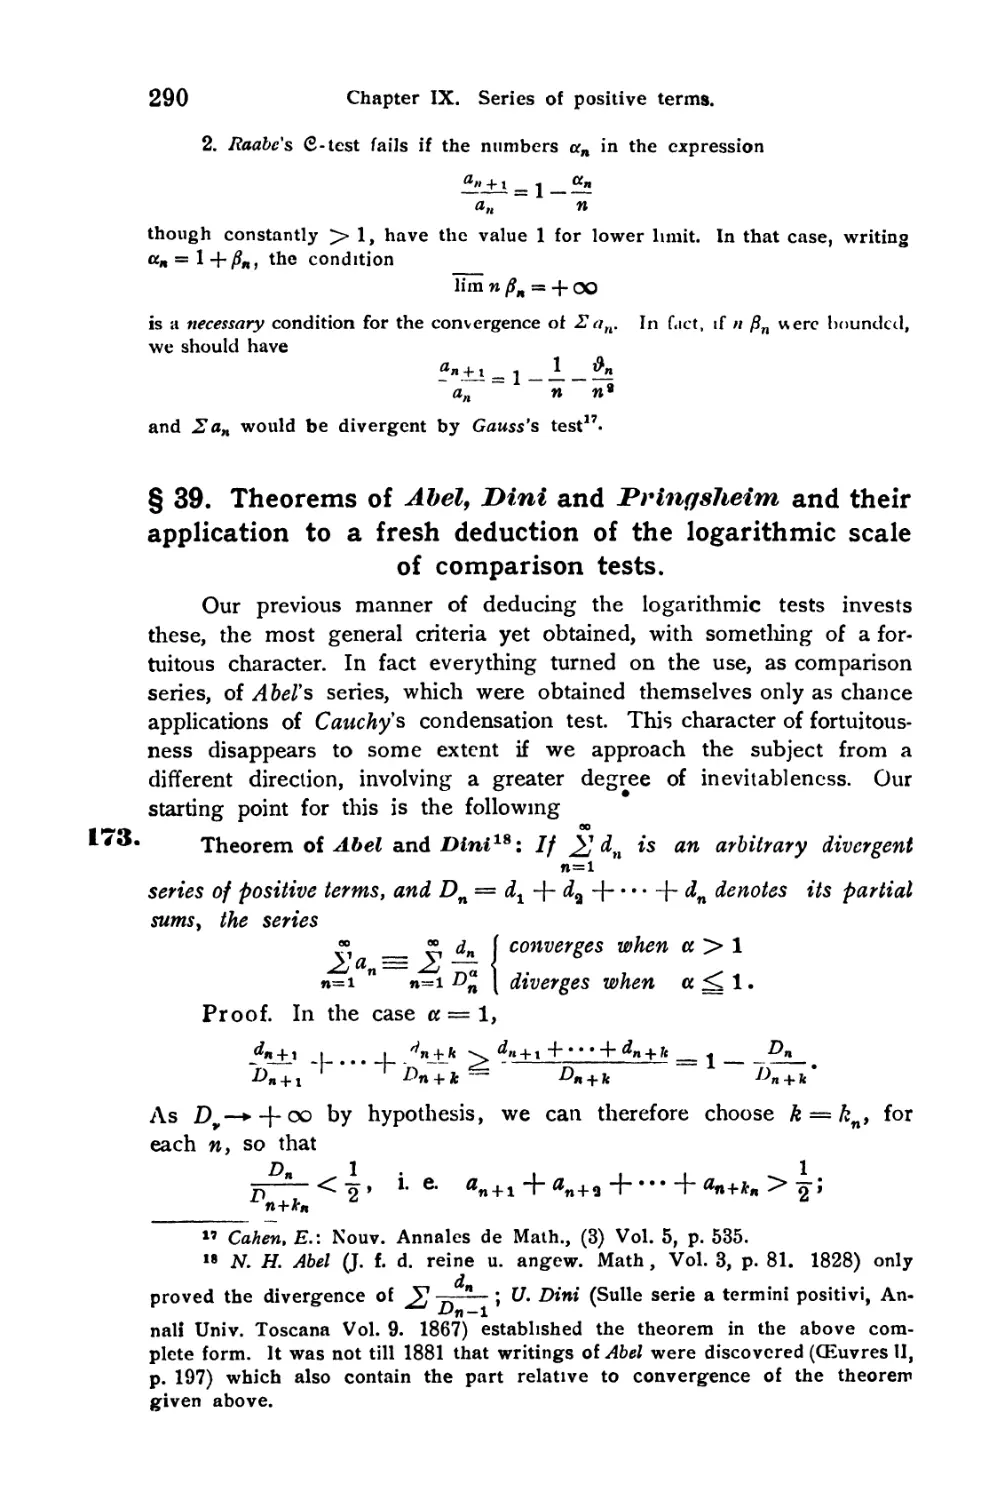 § 39. Theorems of Abel, Dini, and Pringsheim, and their application to a fresh deduction of the logarithmic scale of comparison tests